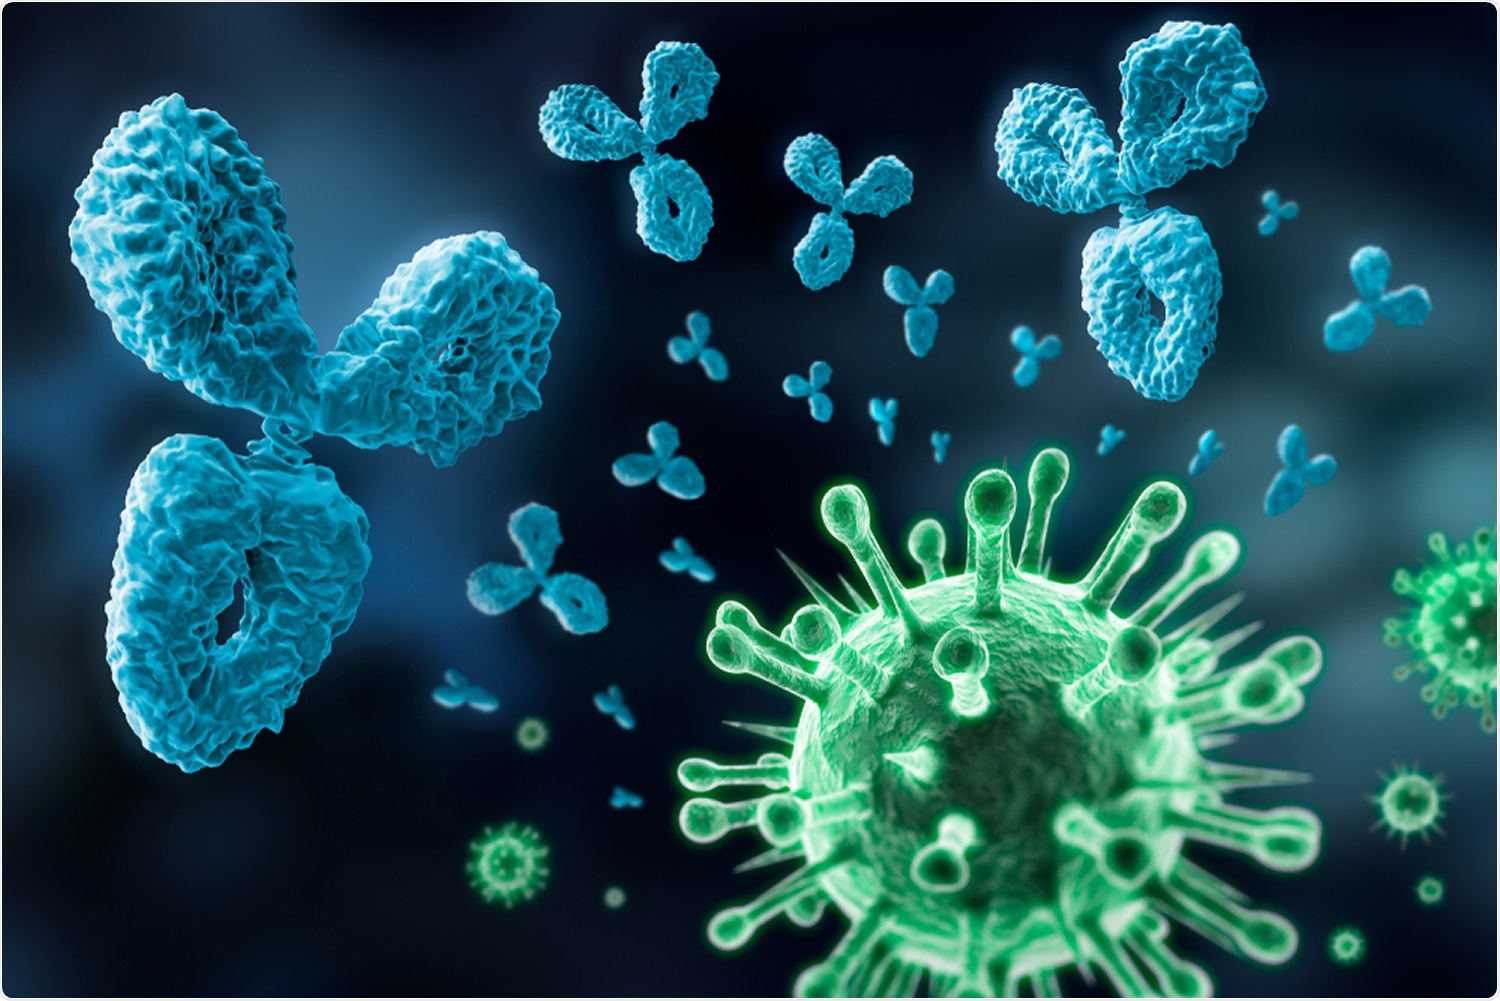 Study: Increasing SARS-CoV-2 antibody prevalence in England at the start of the second wave: REACT-2 Round 4 cross-sectional study in 160,000 adults. Image Credit: peterschreiber.media / Shutterstock